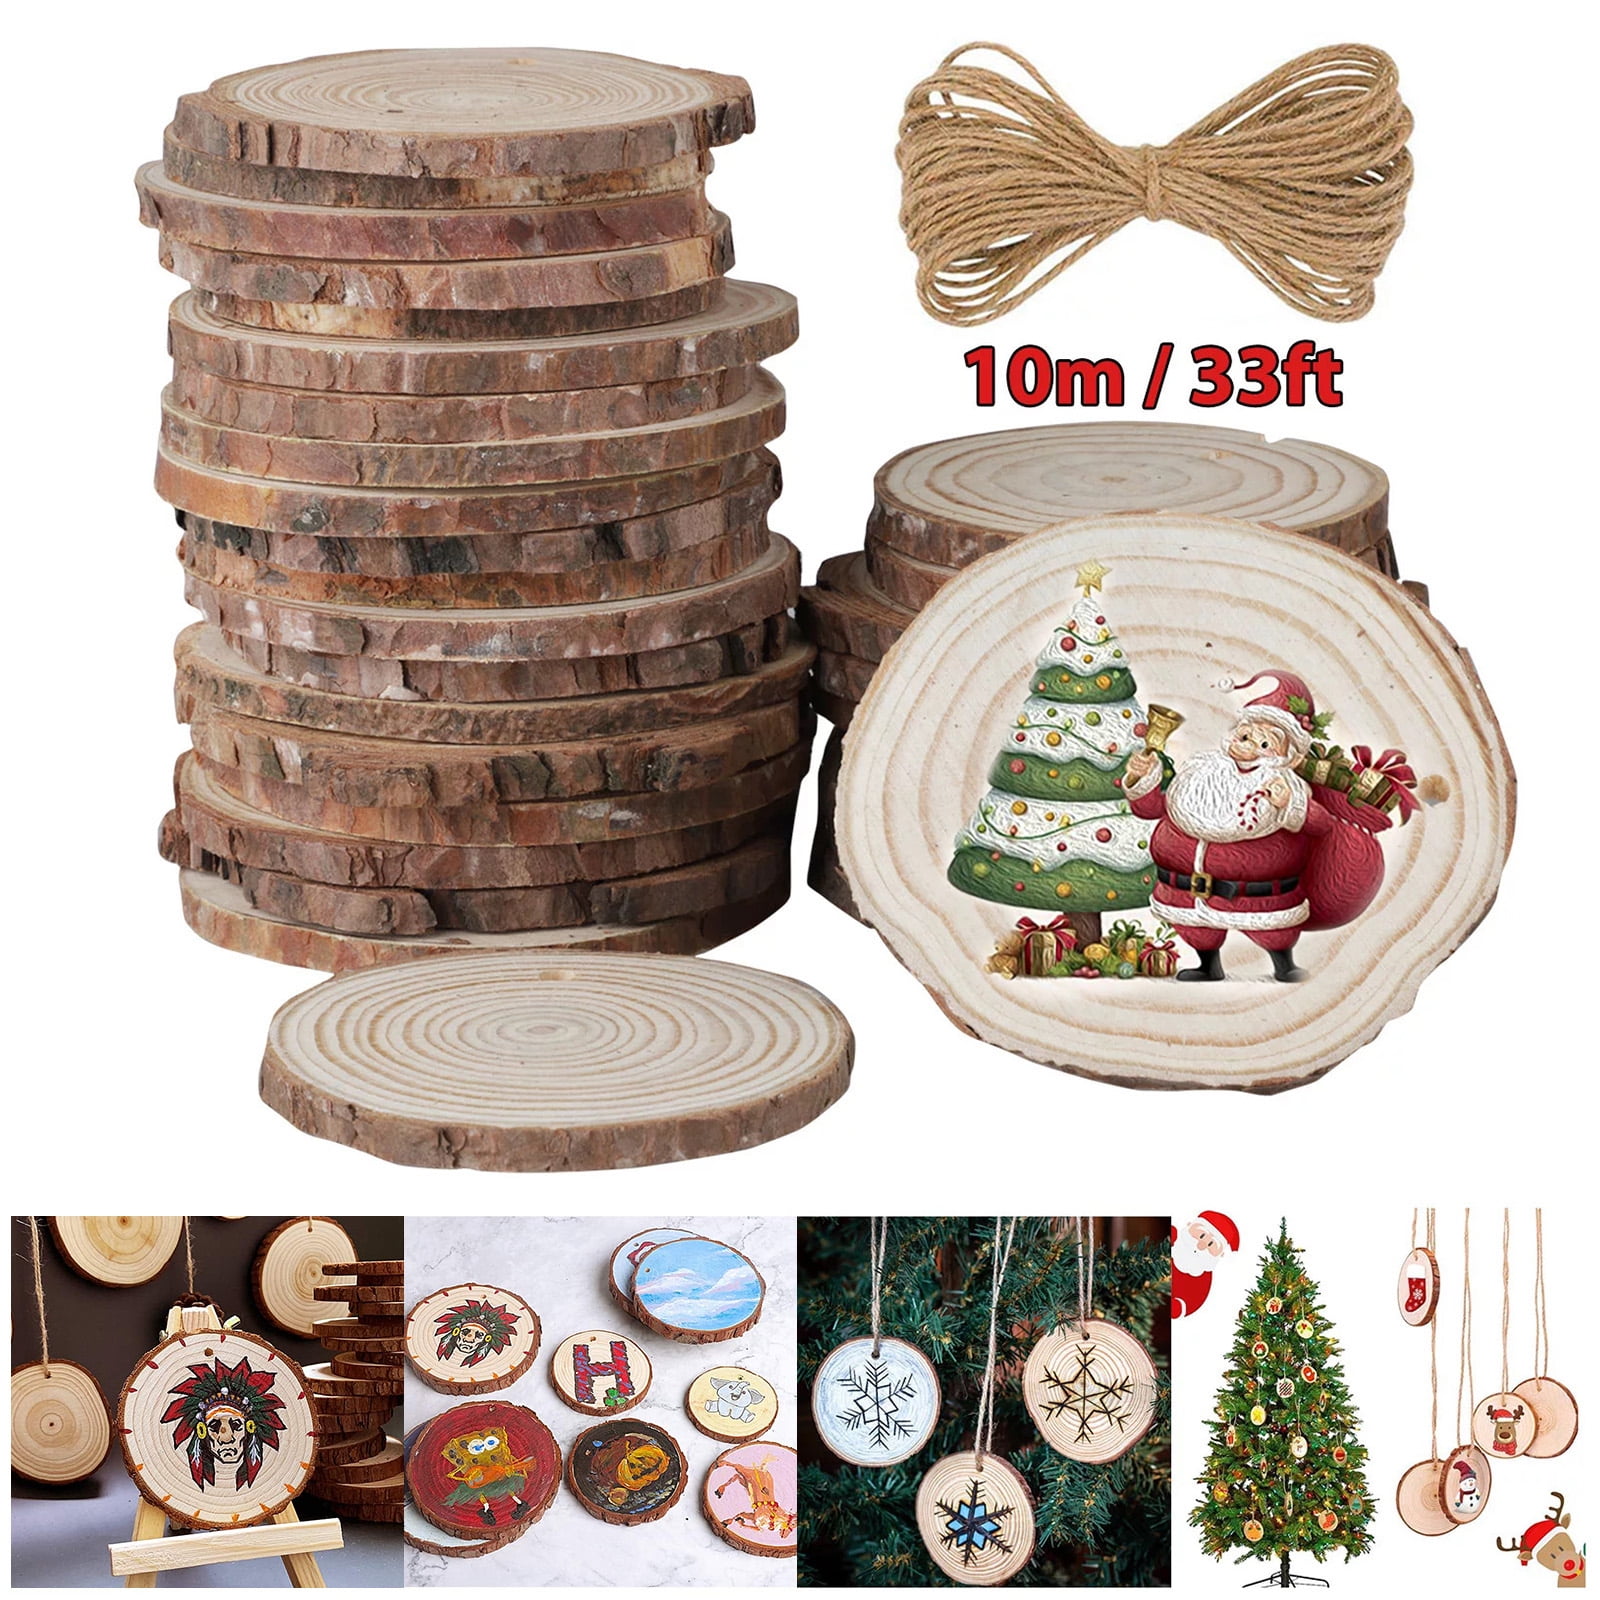 Wall Art Wood Burning And Painting Project Christmas Ornaments Natural Wood Slices 30Pcs 2.4-2.8 inch With Twine String Rustic Wedding Decor Wood Discs With Barks And Hole For DIY Crafts 